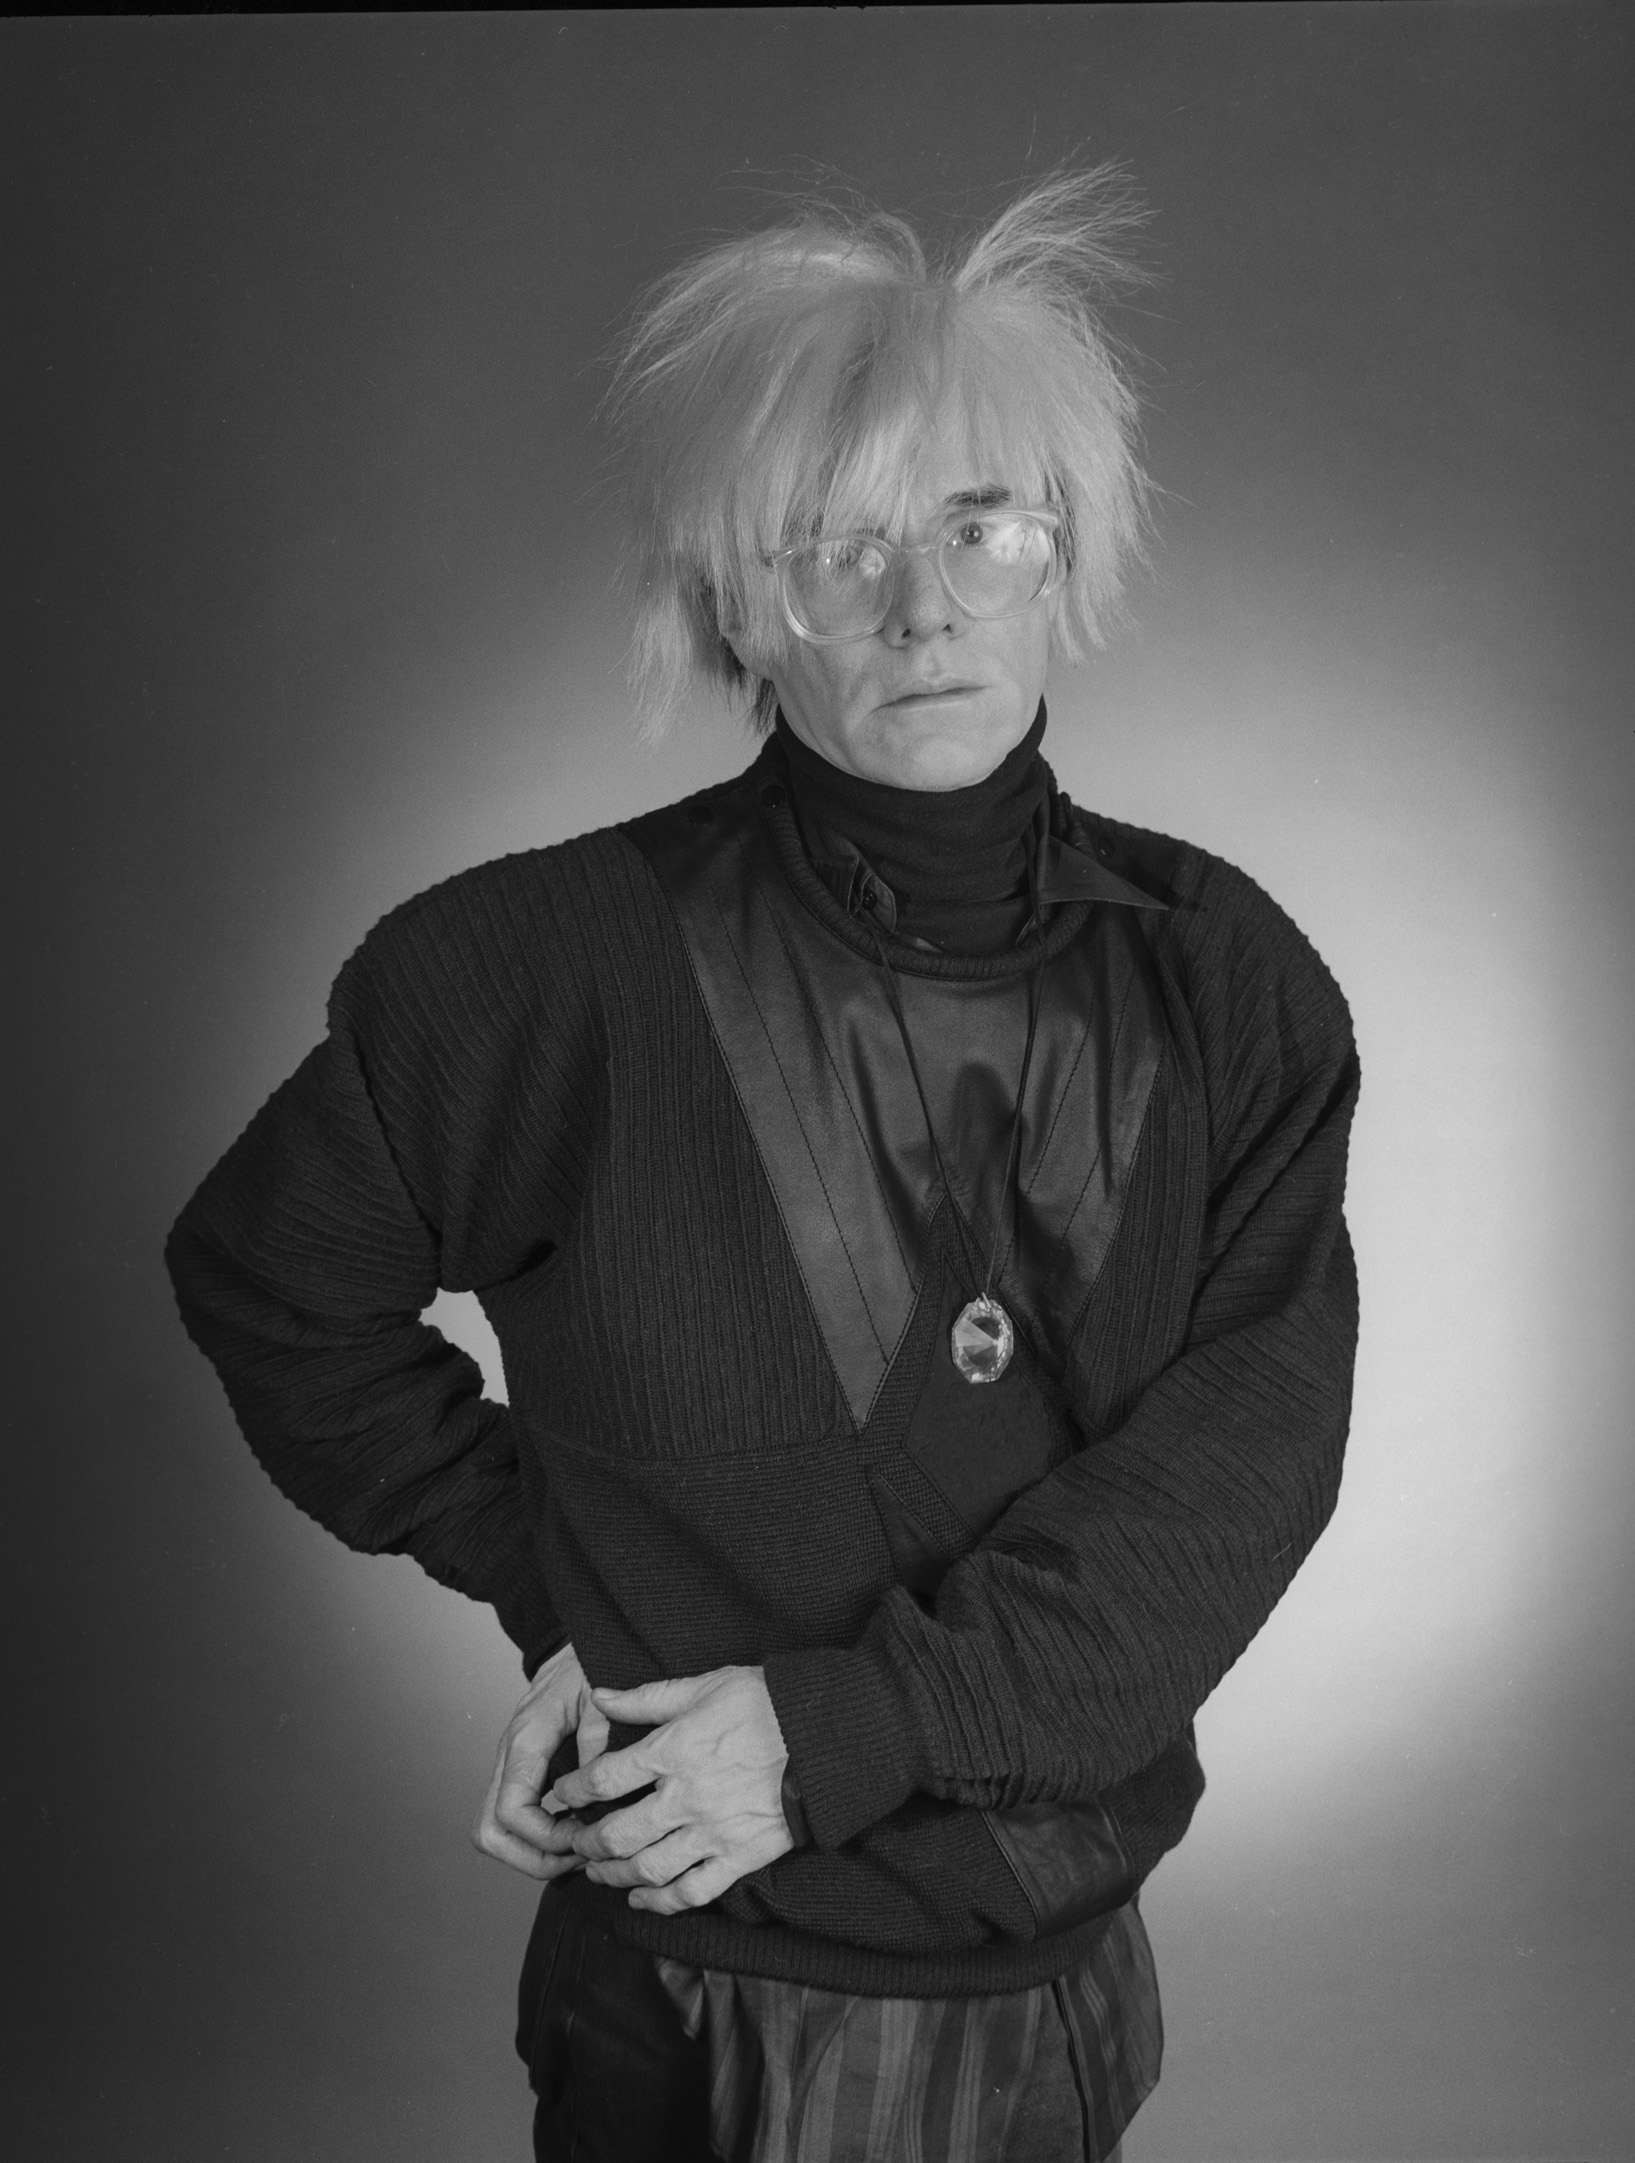 andy warhol with his hands on his hips in a black and white image by christopher makos